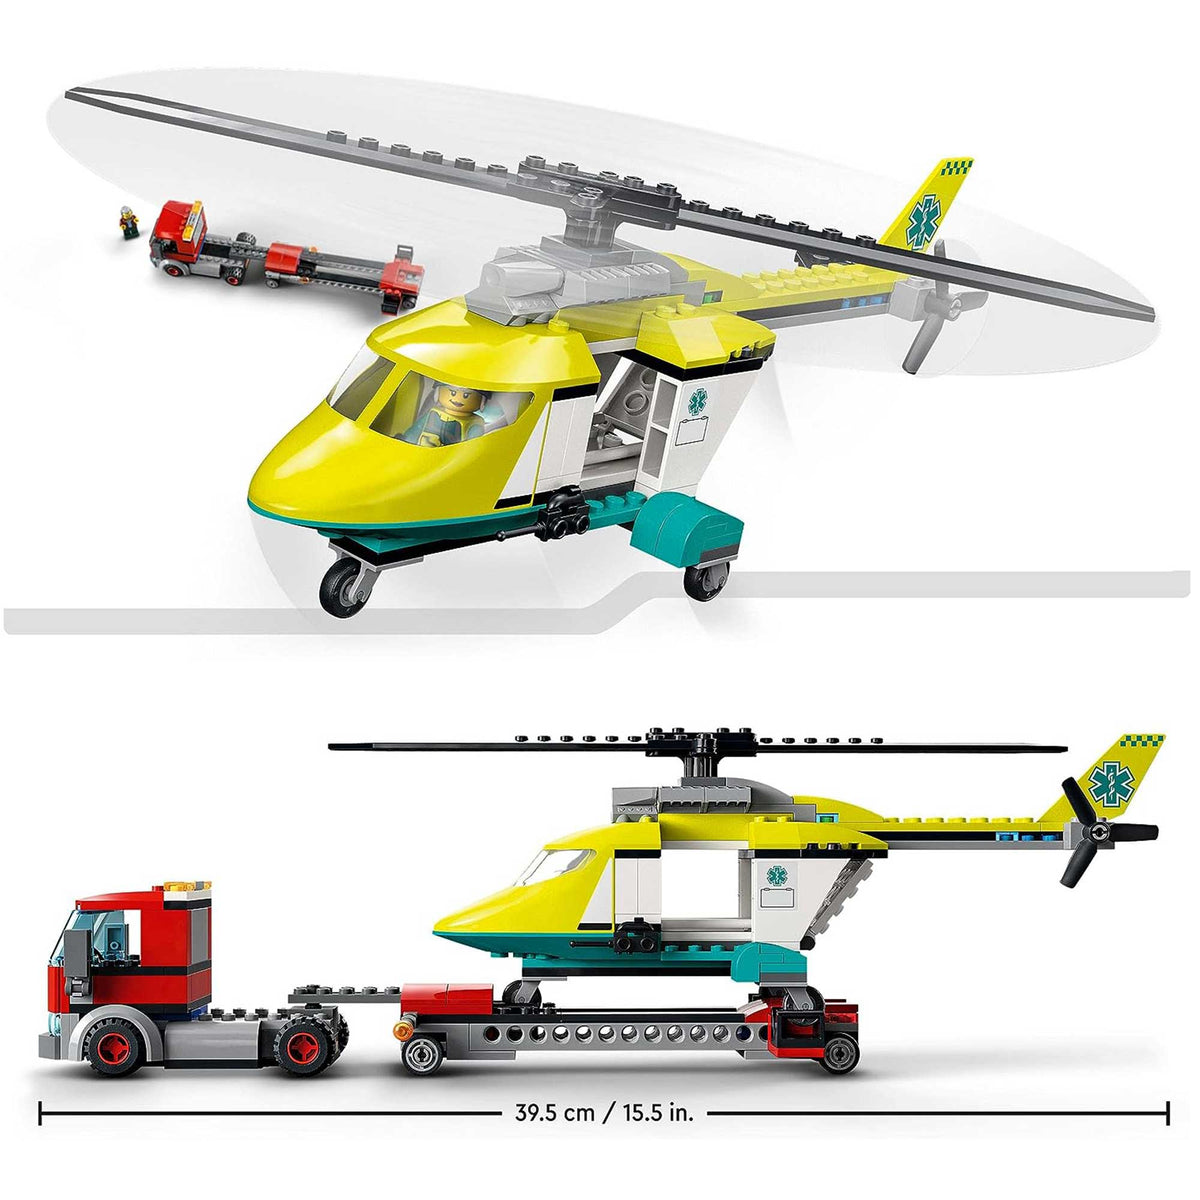 LEGO City Rescue Helicopter Transport Toy Building Set